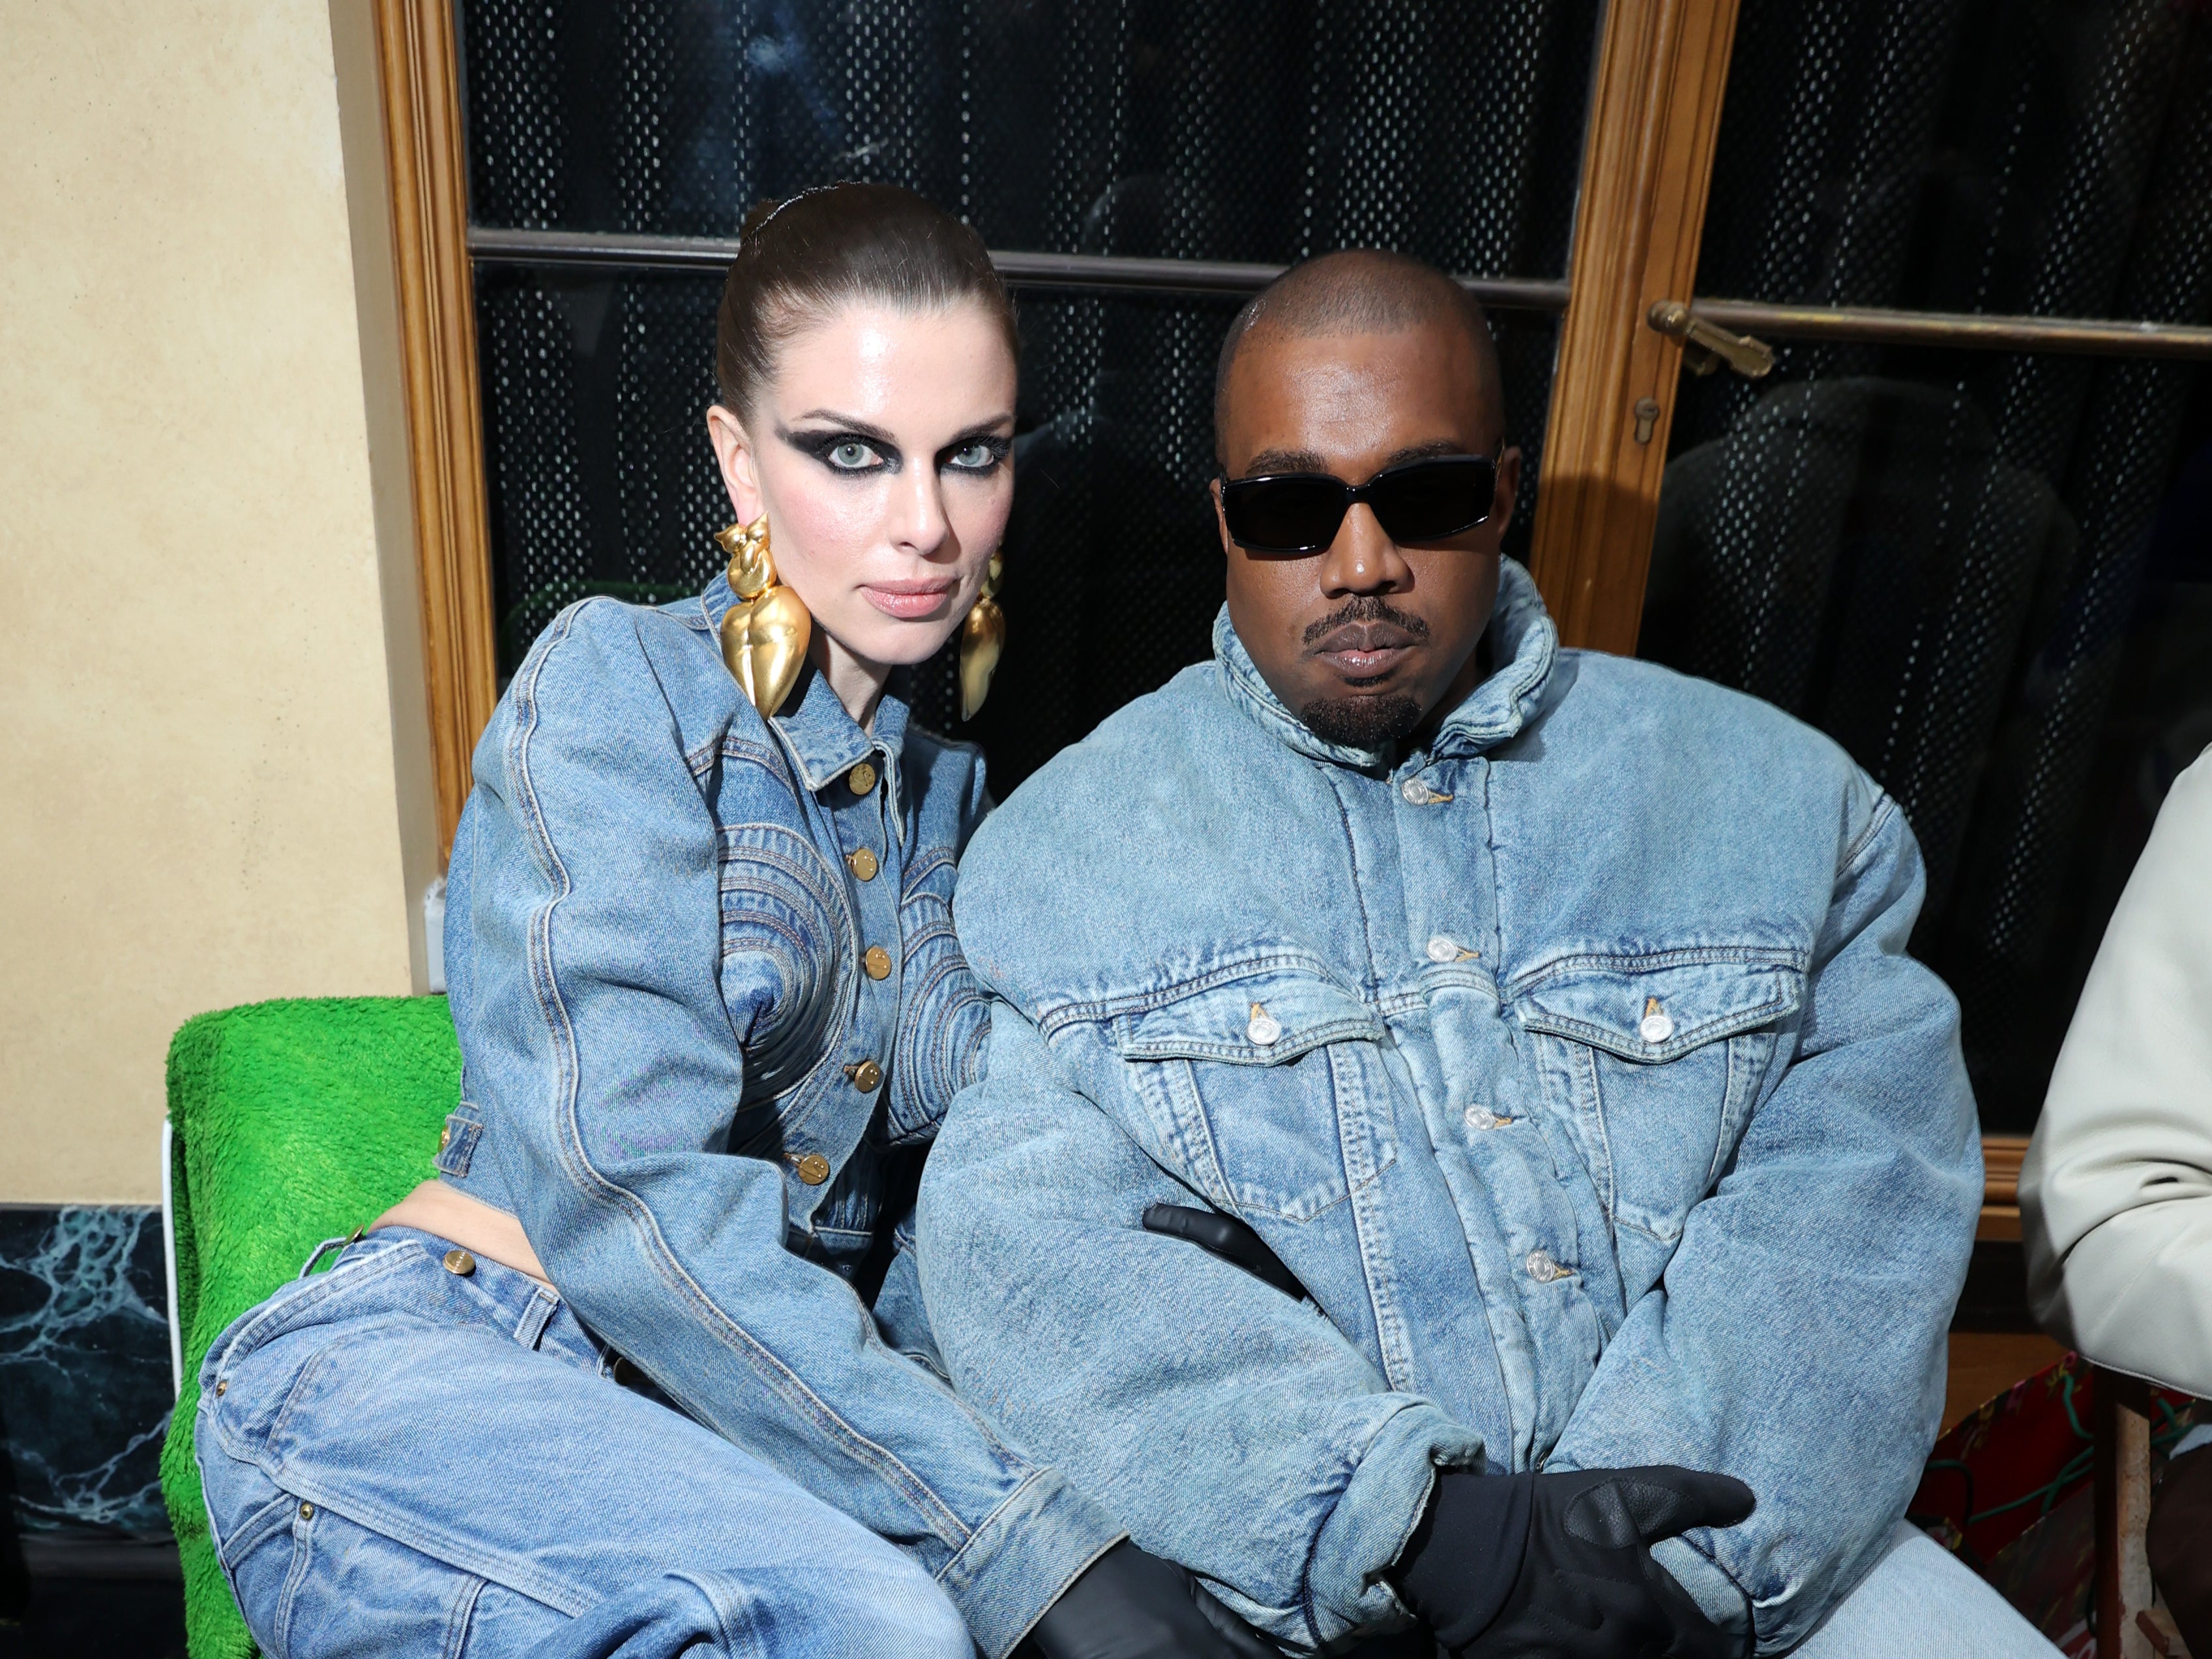 Julia Fox and Kanye West attended a number of Paris Men’s Fashion Week shows together